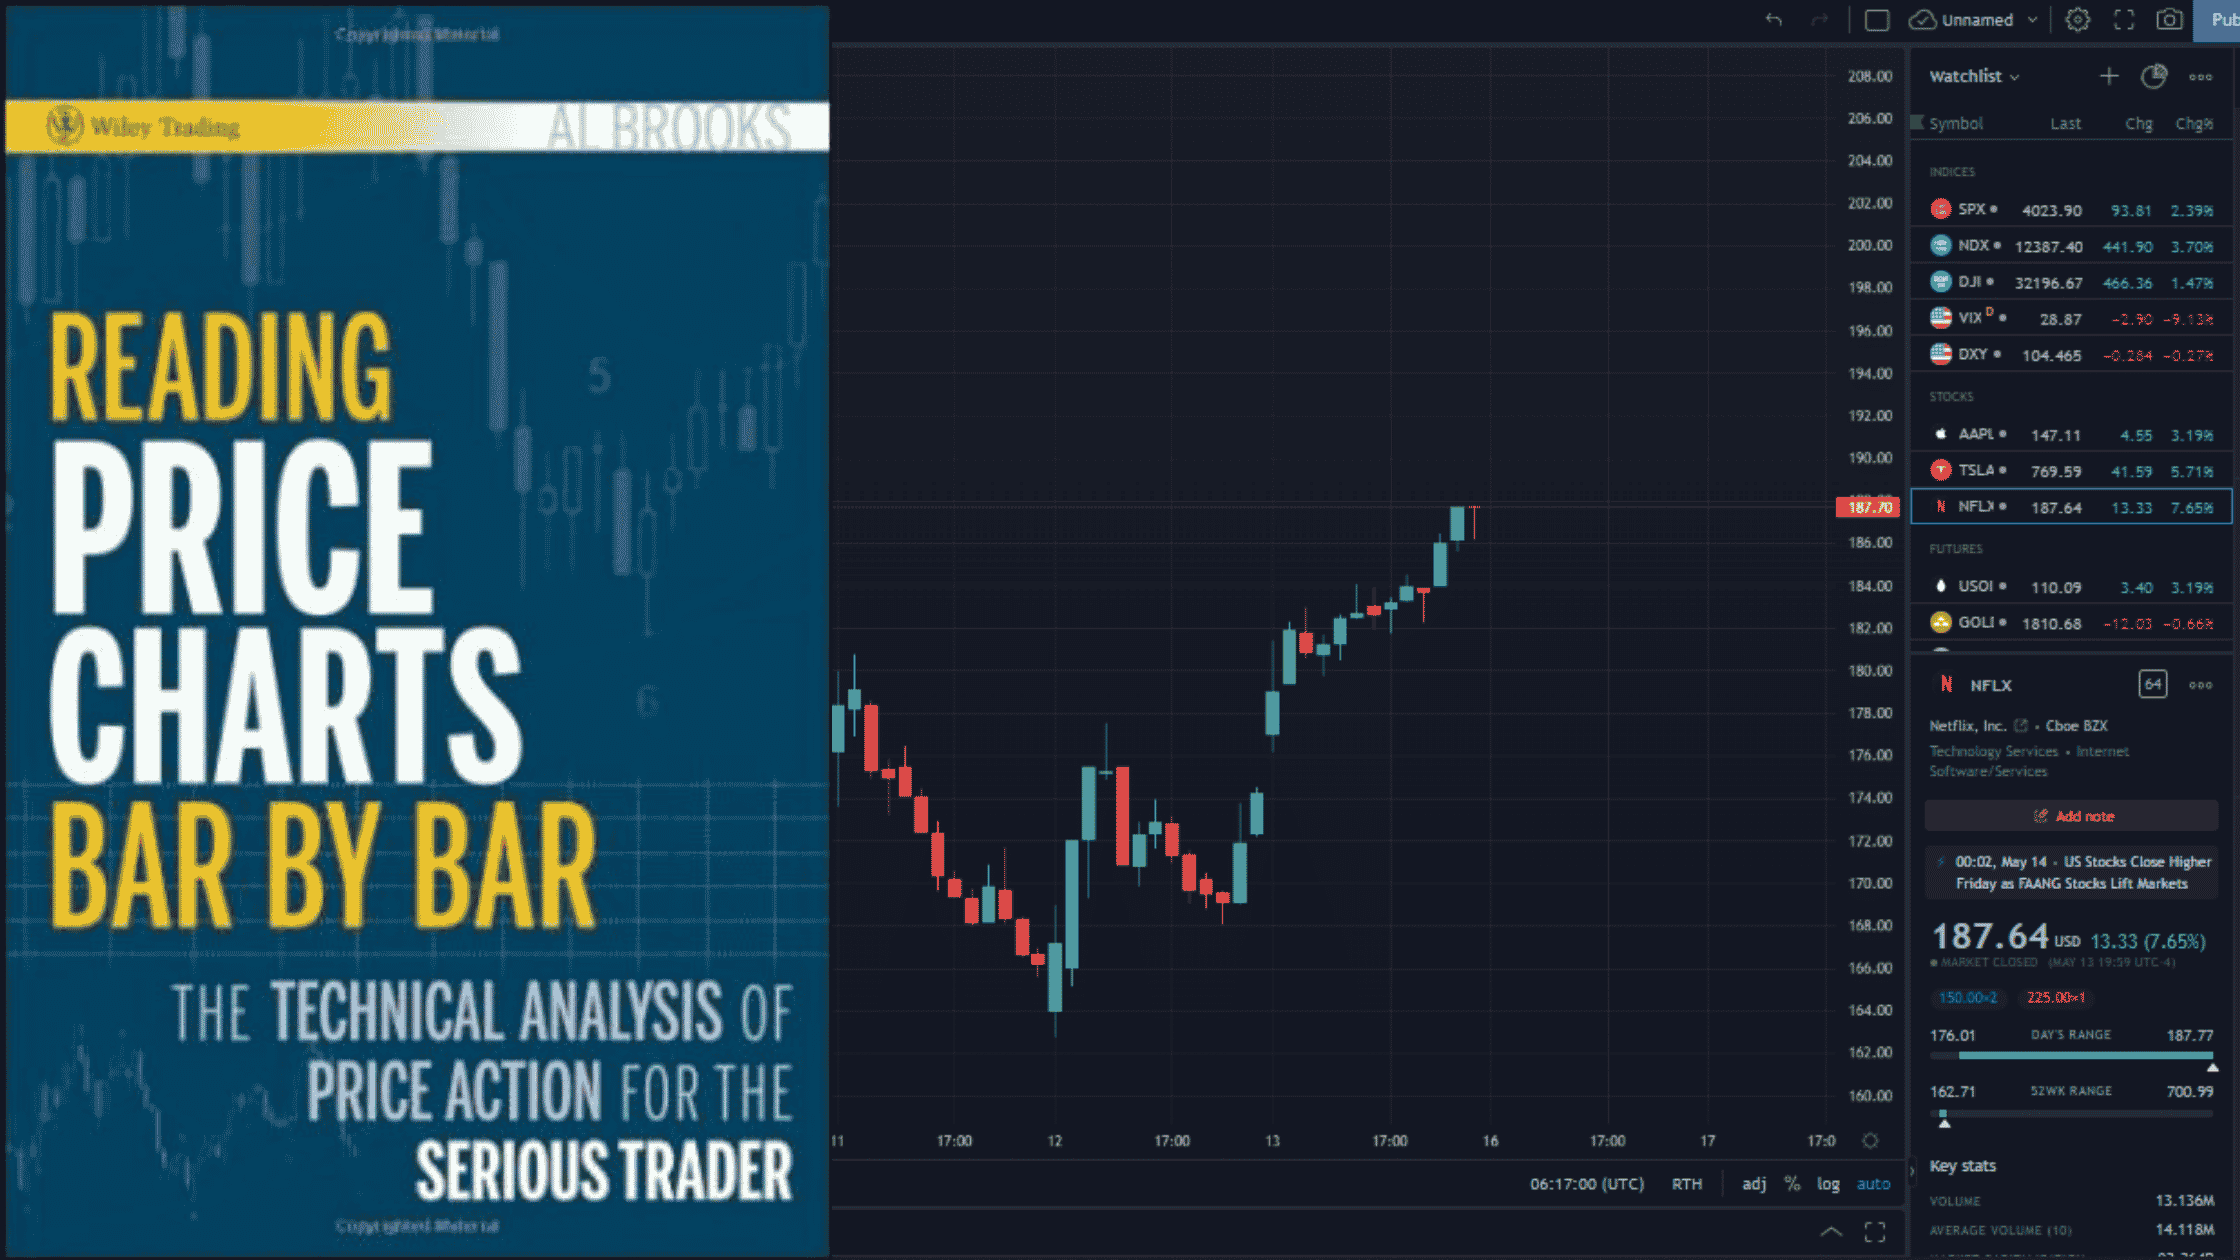 Reading Price Charts Bar by Bar: The Technical Analysis of Price Action for the Serious Trader.